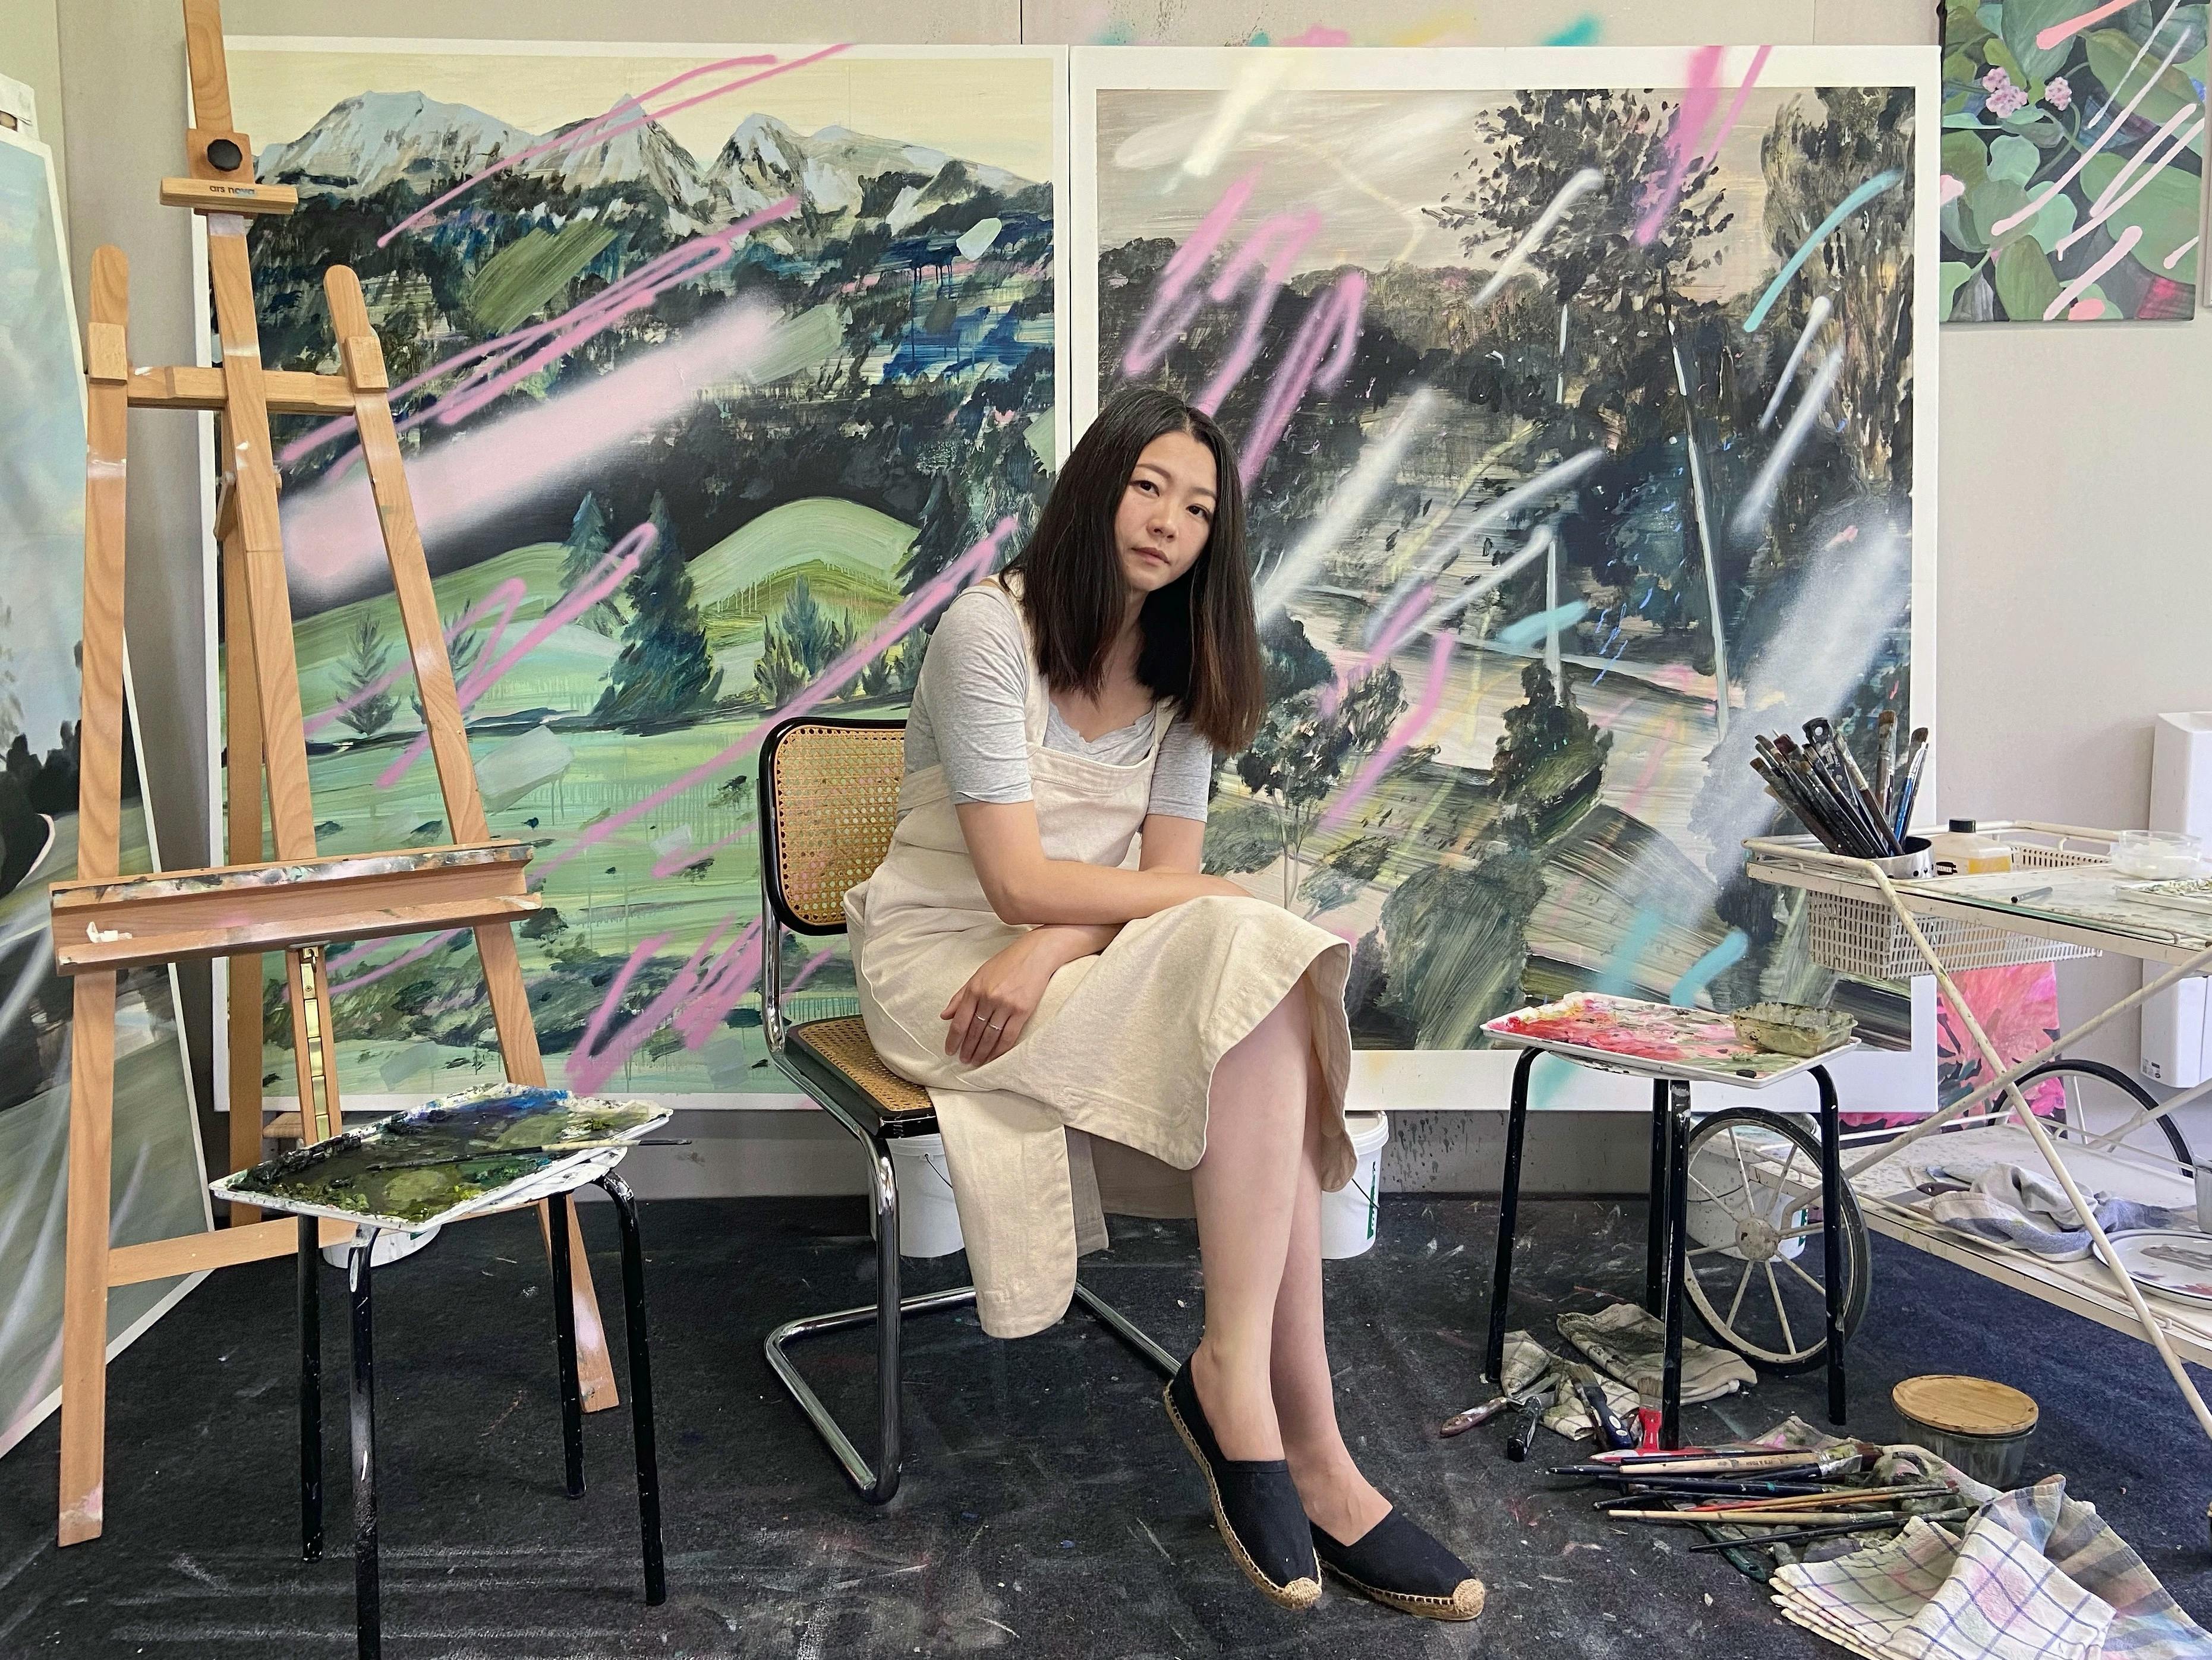 The artist Una Ursprung sitting in her studio in front of two large paintings that depict landscapes interspersed with abstract pink, and white spraypaint marks.